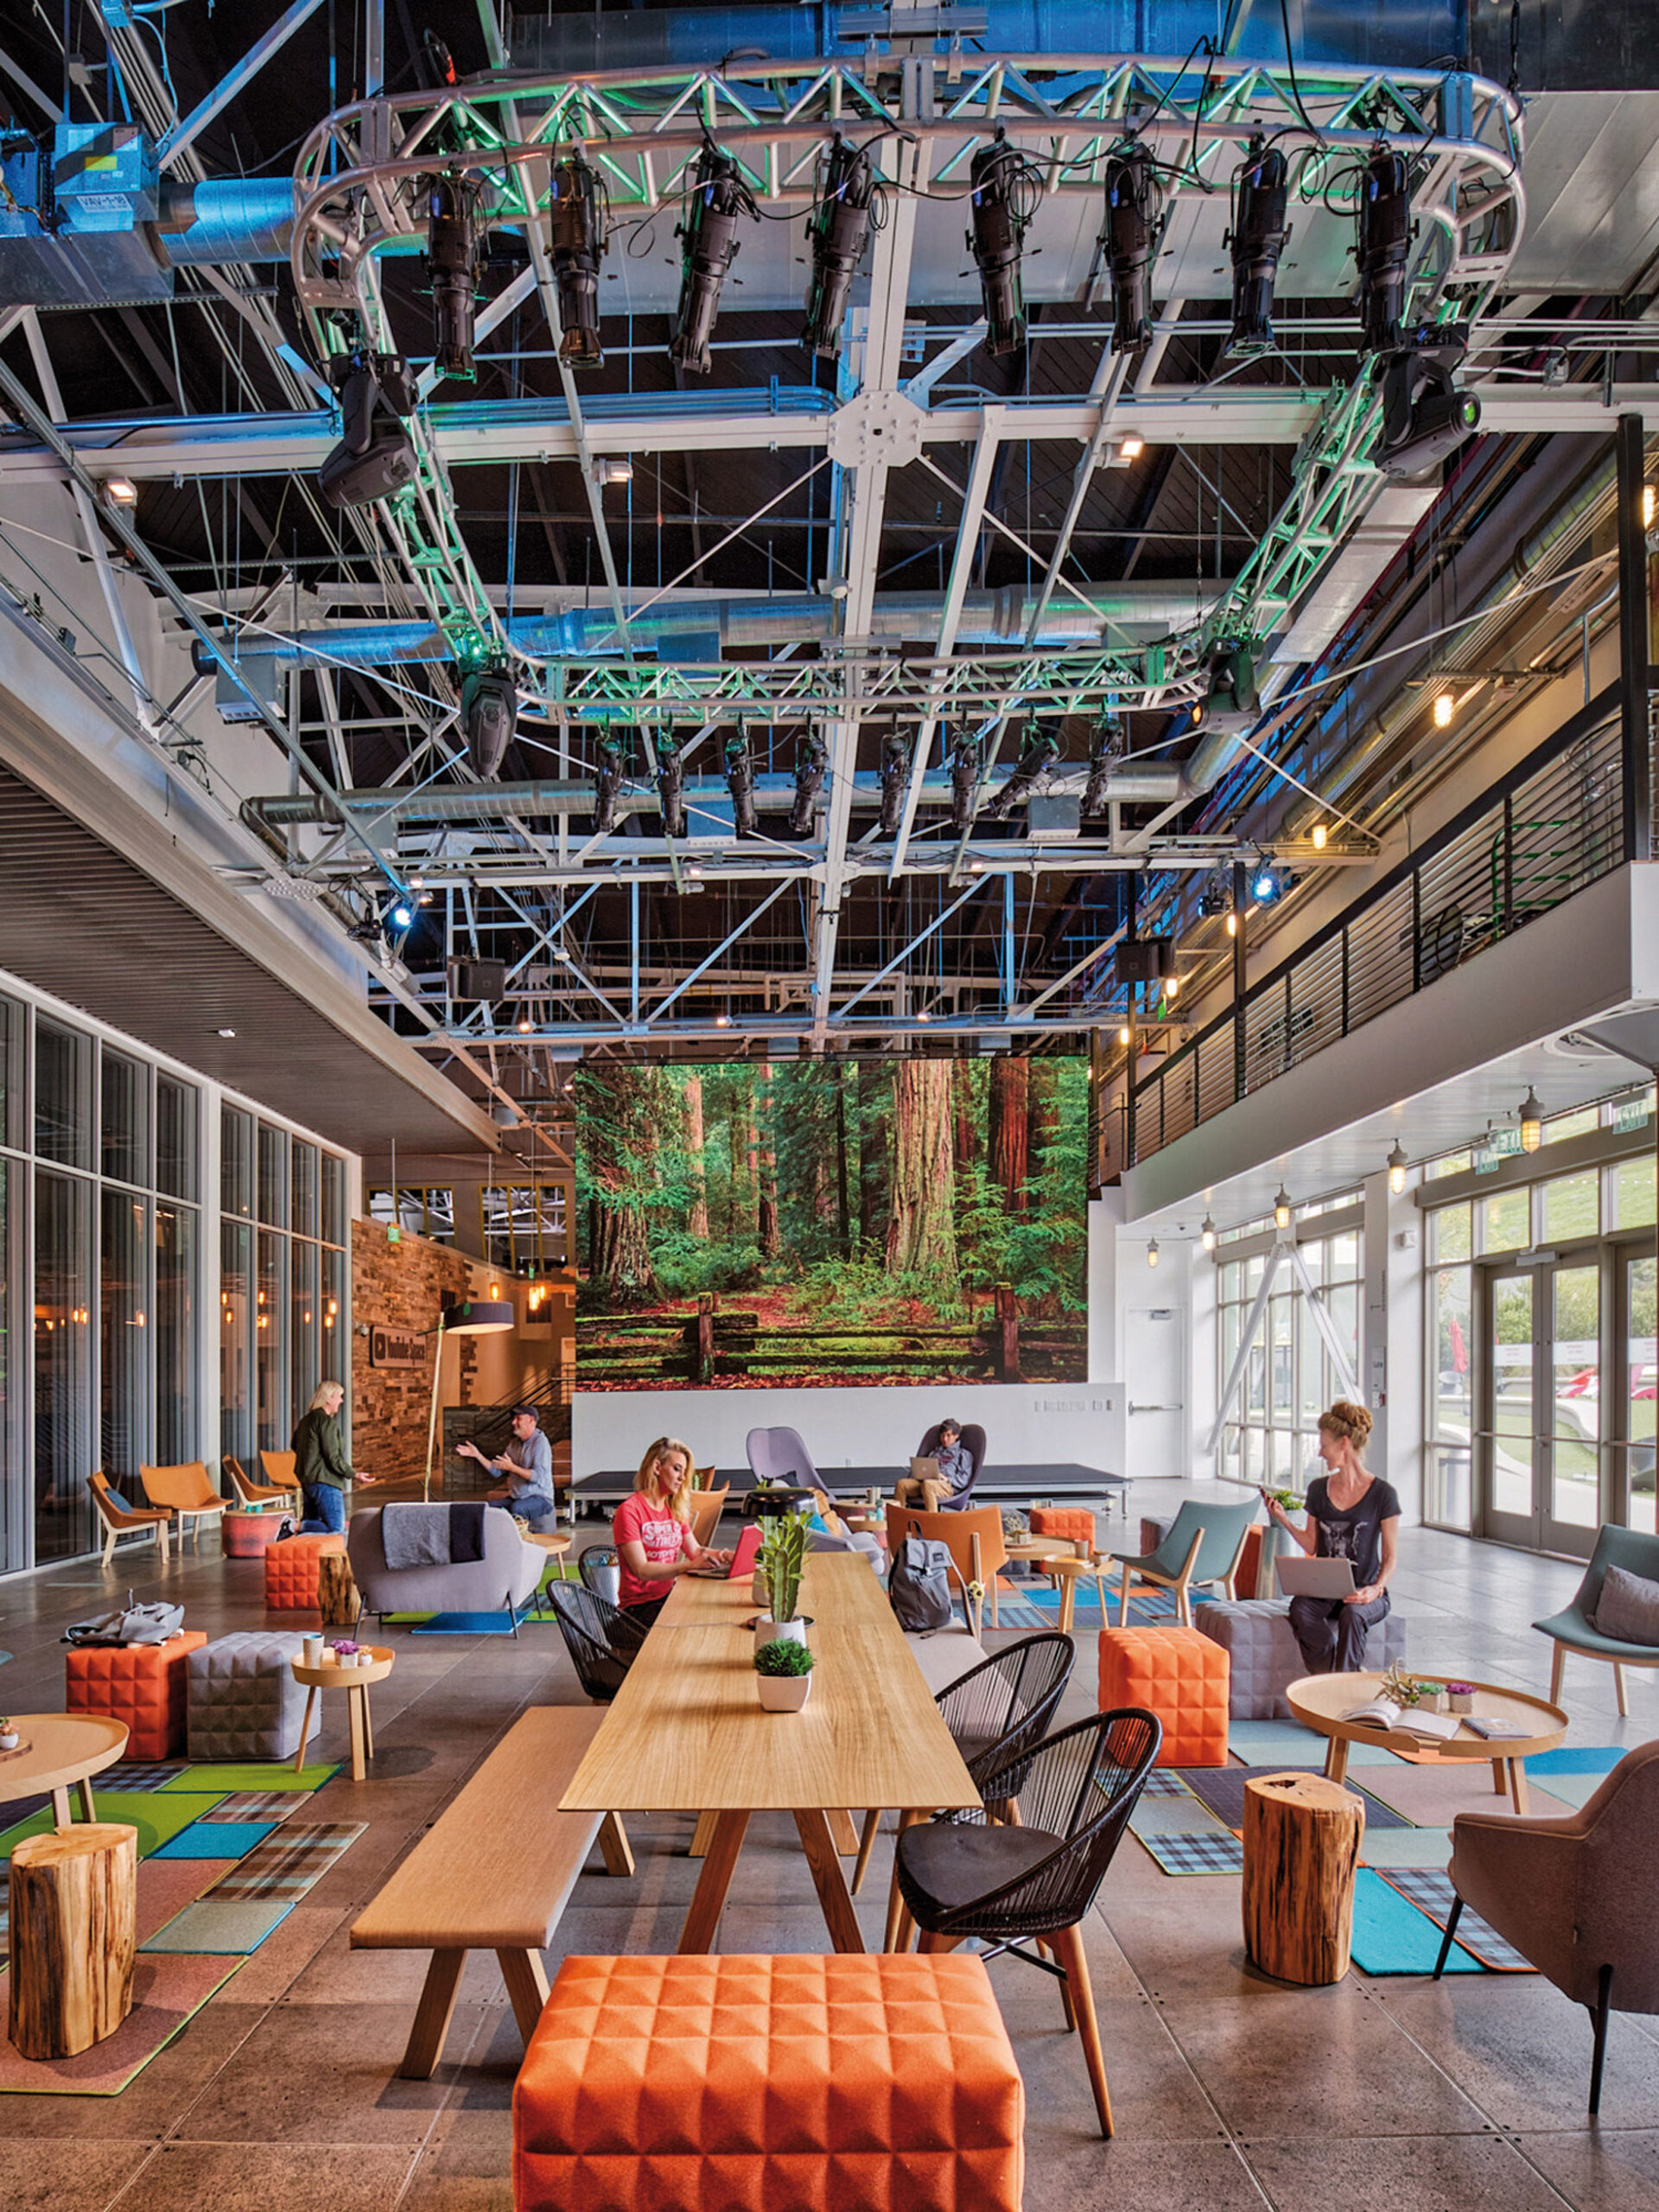 Exposed structural and mechanical elements grace the high ceiling of this vibrant, modern lobby, contributing to its industrial-chic aesthetic. A mix of natural textures and colorful furniture, including wooden tables and eclectic seating options, creates a dynamic, inviting atmosphere. A large digital wall displaying a forest scene adds depth and brings an element of nature indoors, enhancing the biophilic design. Large windows allow for ample natural light